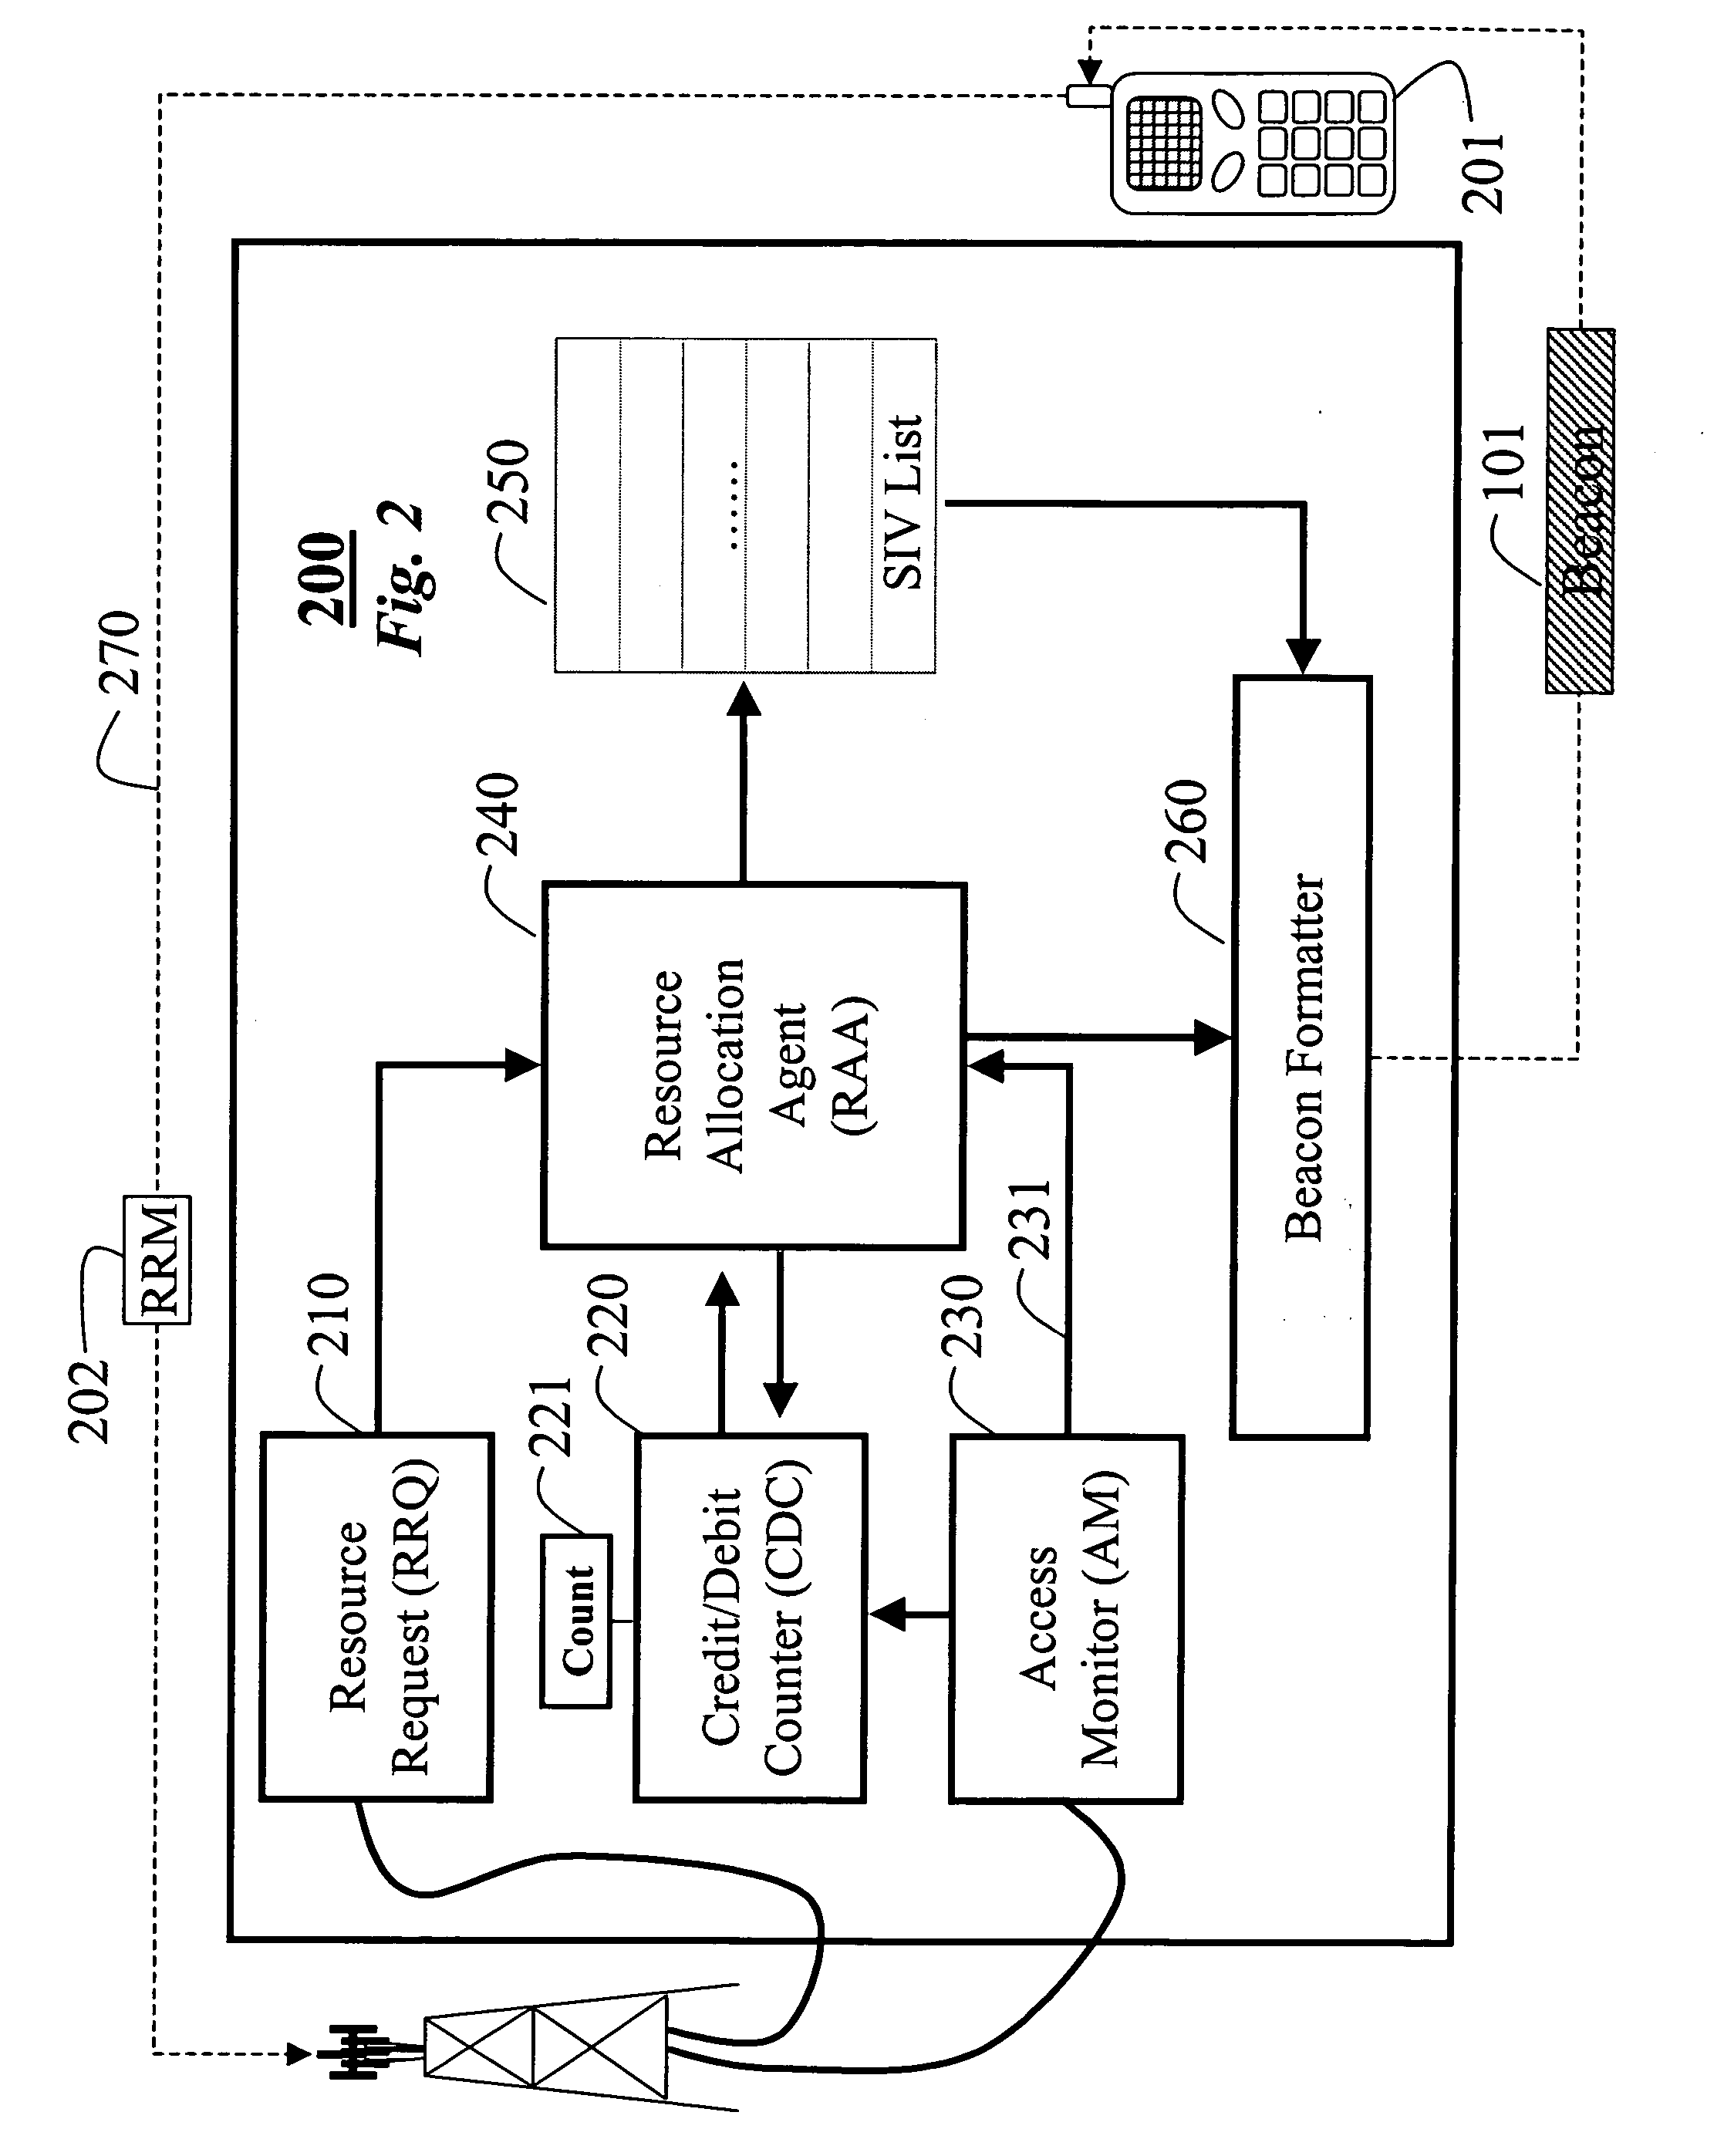 Sequential coordinated channel access in wireless networks